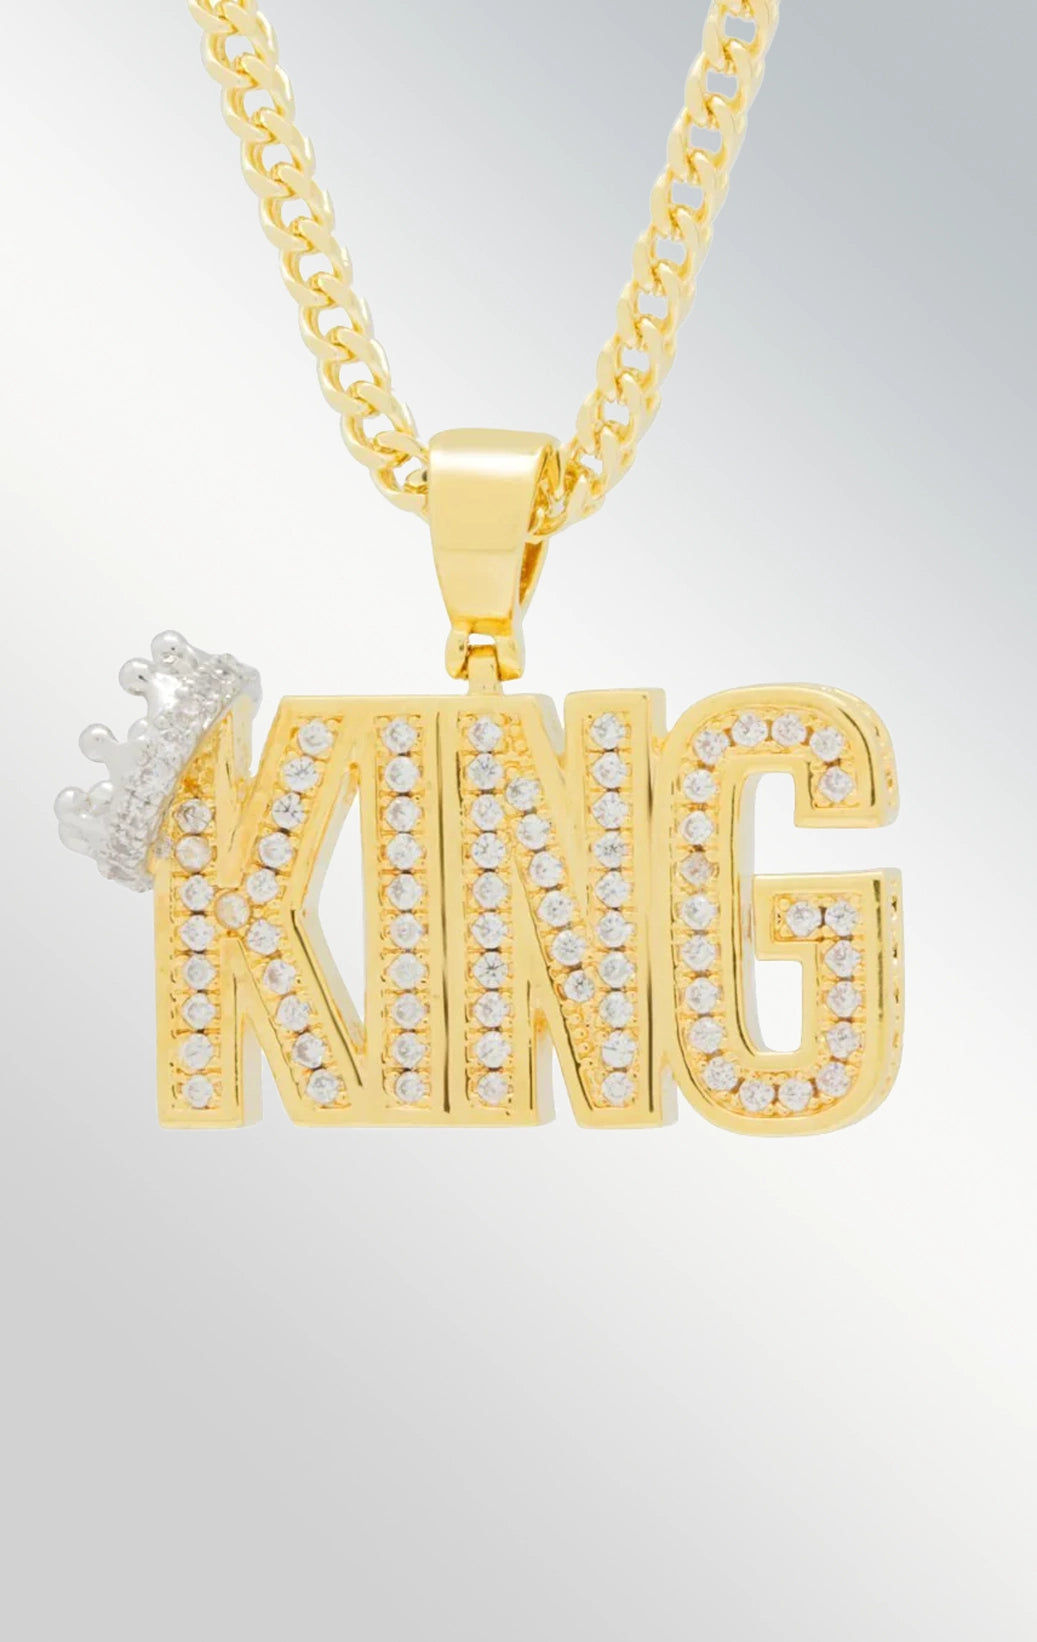 King gold necklace pendant.